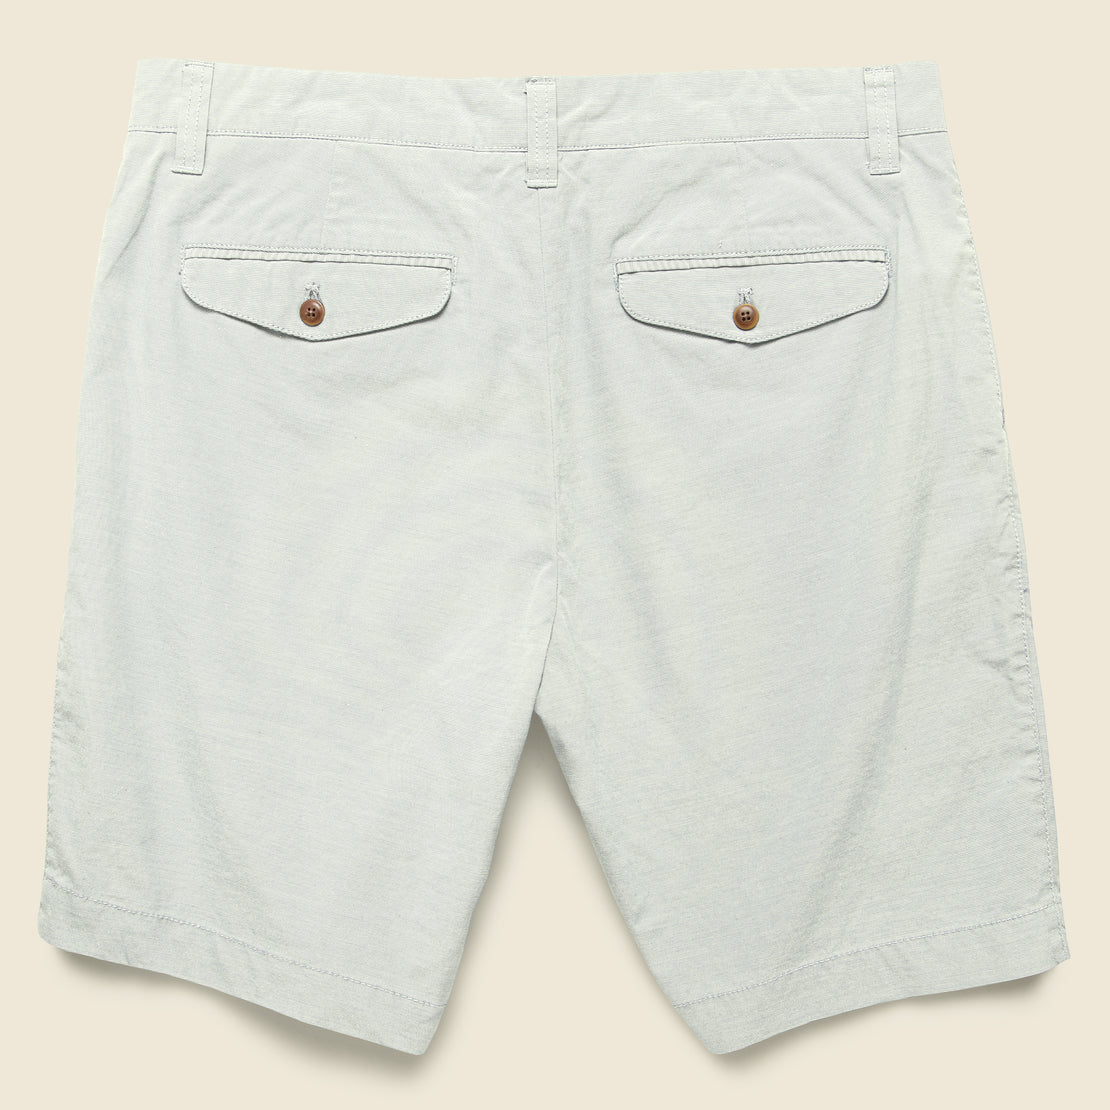 Randolph End on End Short - Khaki - Grayers - STAG Provisions - Shorts - Solid